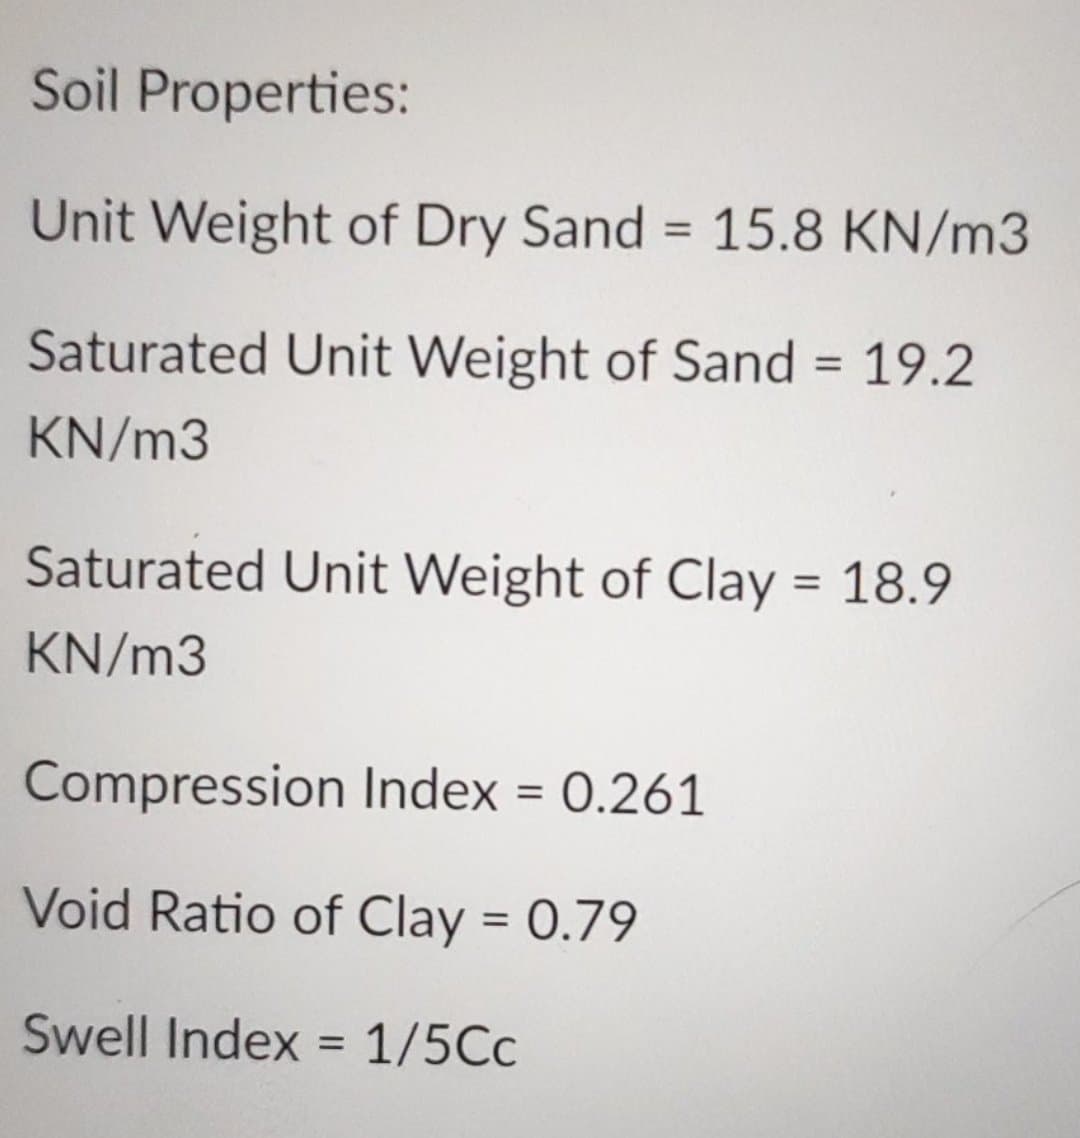 Soil Properties:
Unit Weight of Dry Sand = 15.8 KN/m3
Saturated Unit Weight of Sand = 19.2
KN/m3
Saturated Unit Weight of Clay = 18.9
KN/m3
Compression Index = 0.261
Void Ratio of Clay = 0.79
Swell Index = 1/5Cc